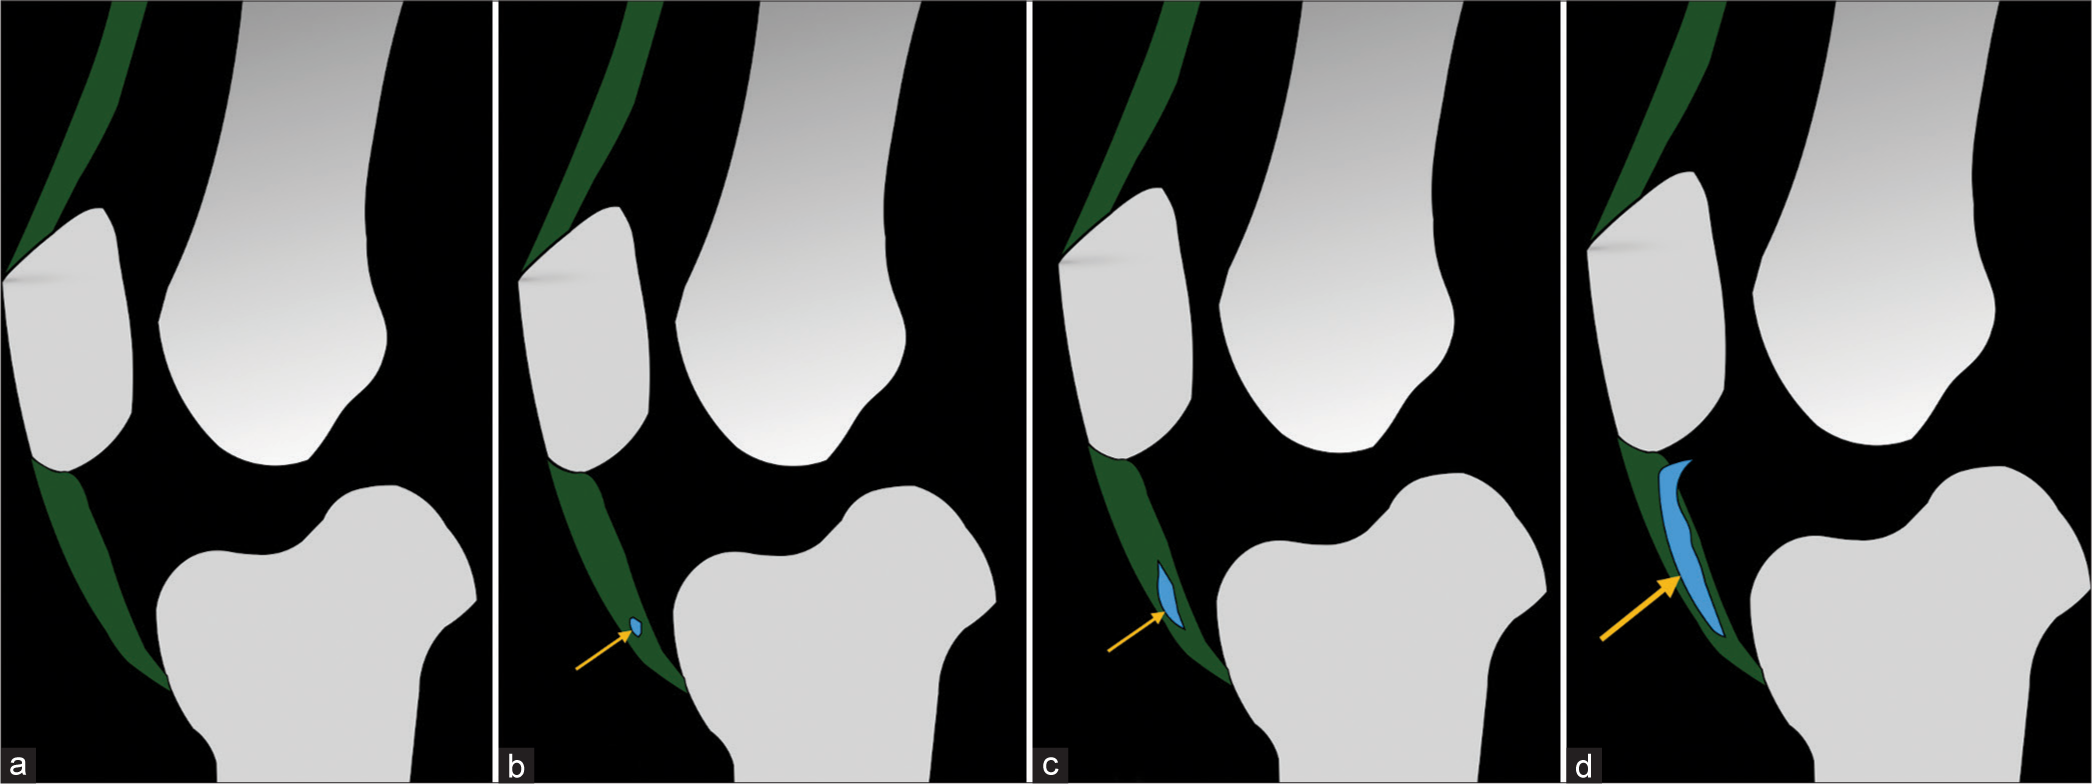 A series of illustrations. Image (a) depicts a healthy patellar tendon. Images (b-d) collectively demonstrate the potential gradual development of an intratendinous ganglion cyst within the patellar tendon (Yellow arrow).